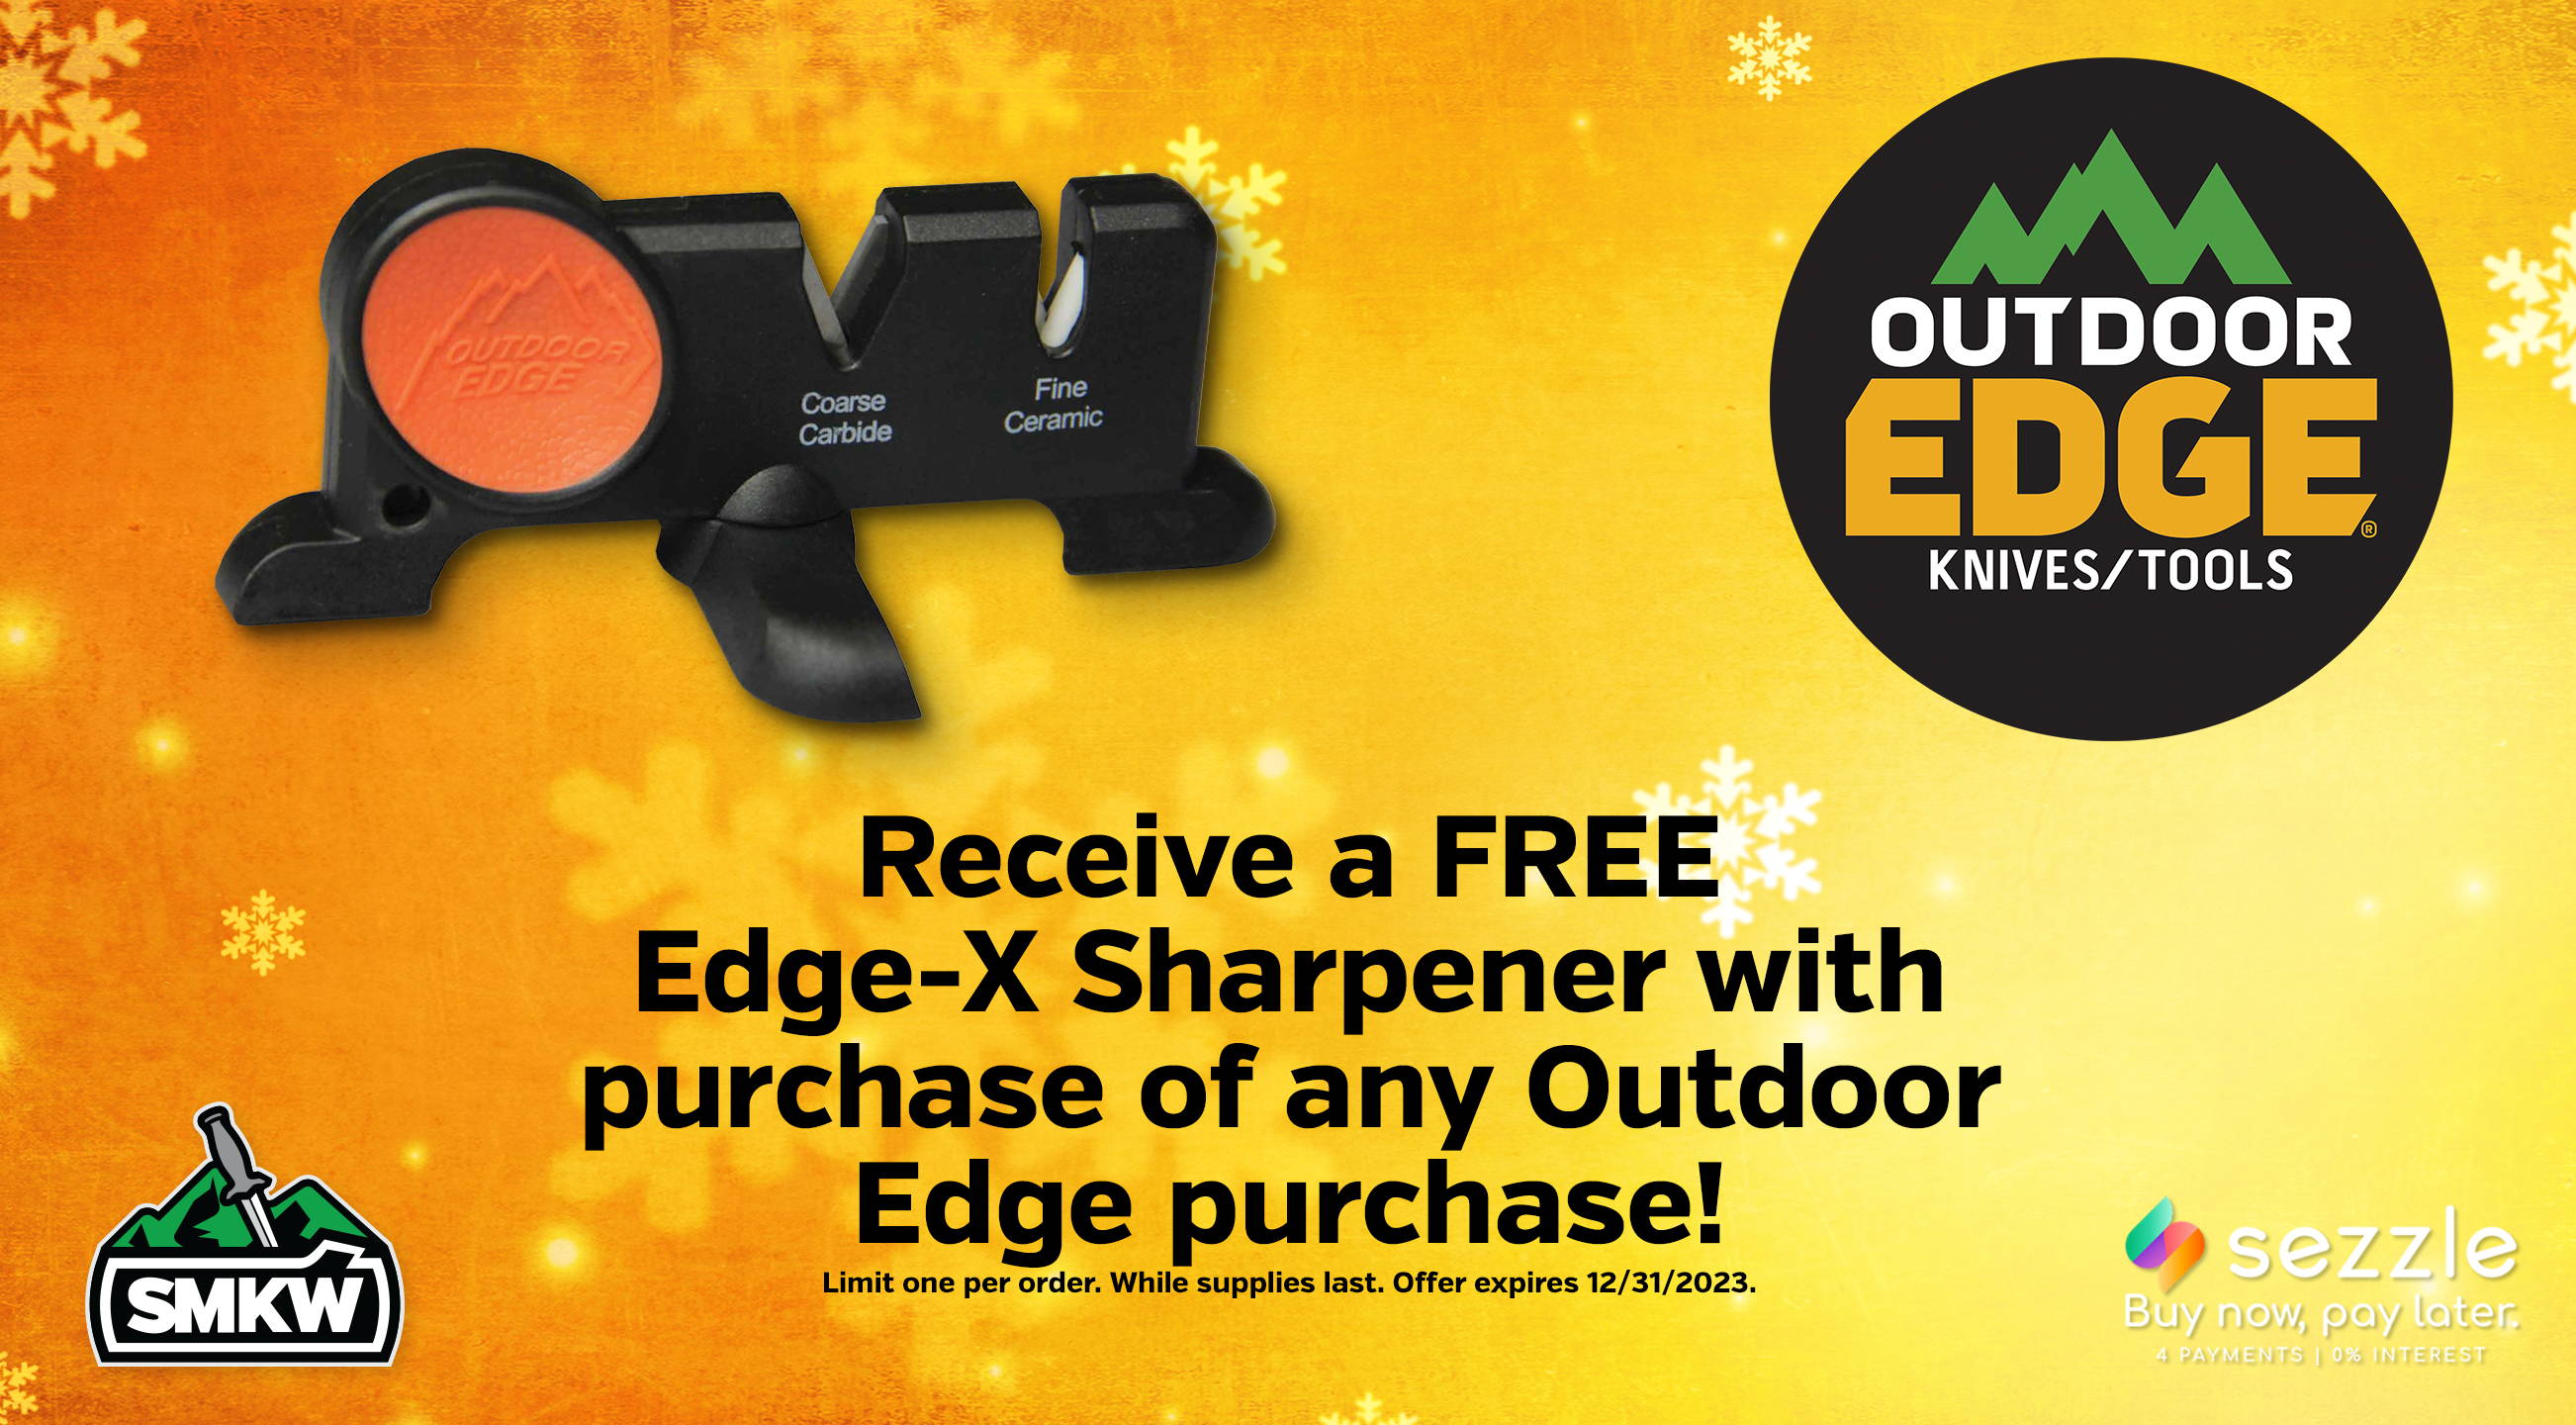 Free Edge-X Sharpener with any Outdoor Edge purchase.